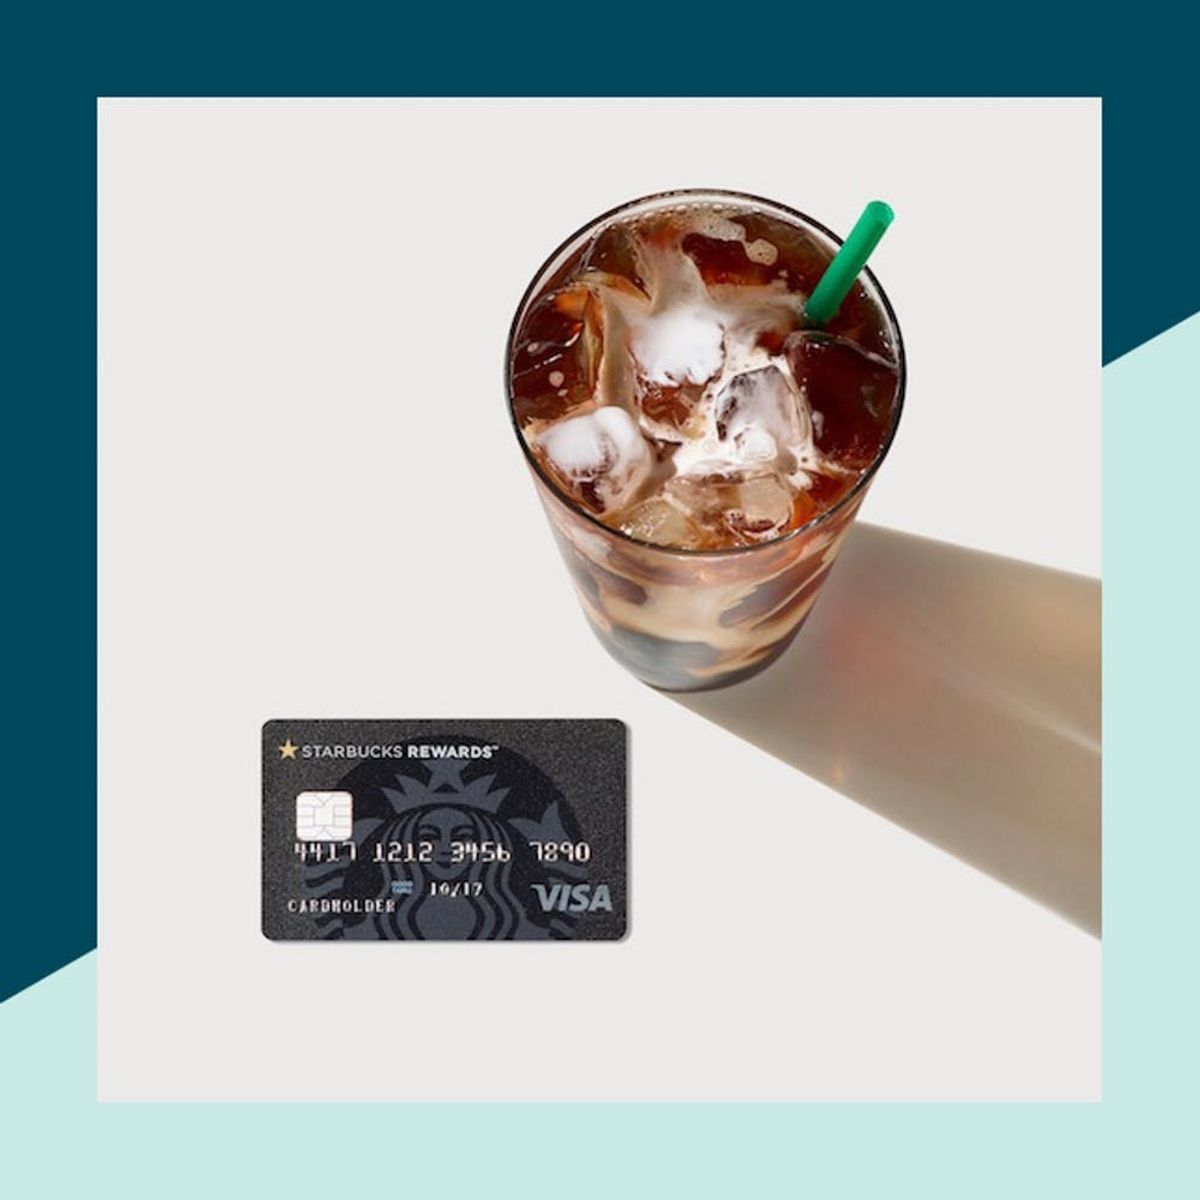 Starbucks Just Teamed Up With Chase to Bring You a Credit Card With Next Level Rewards